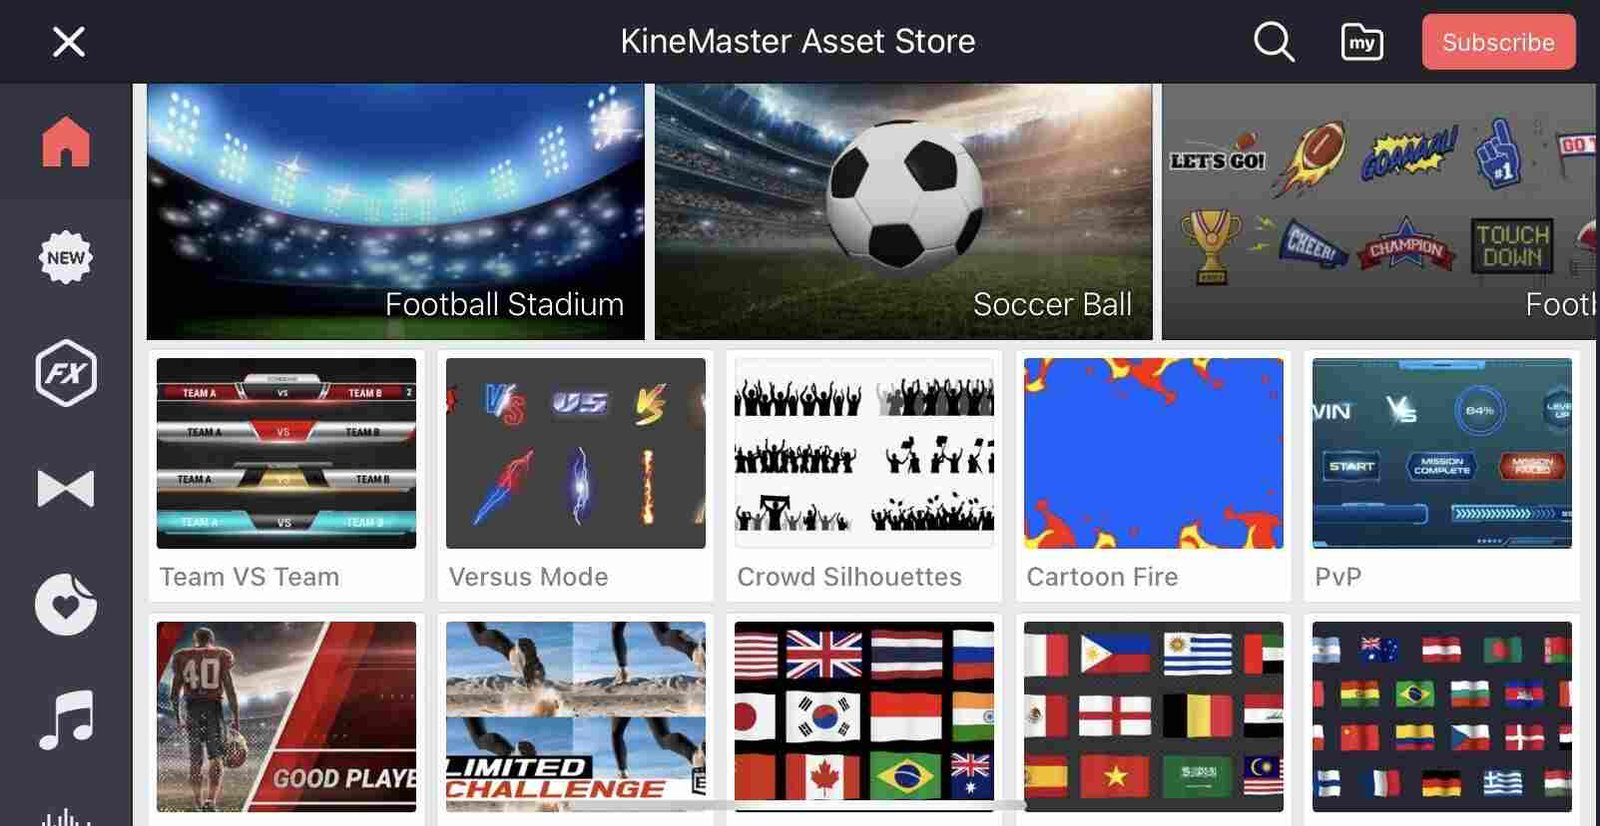 download all kinemaster assets from assets store